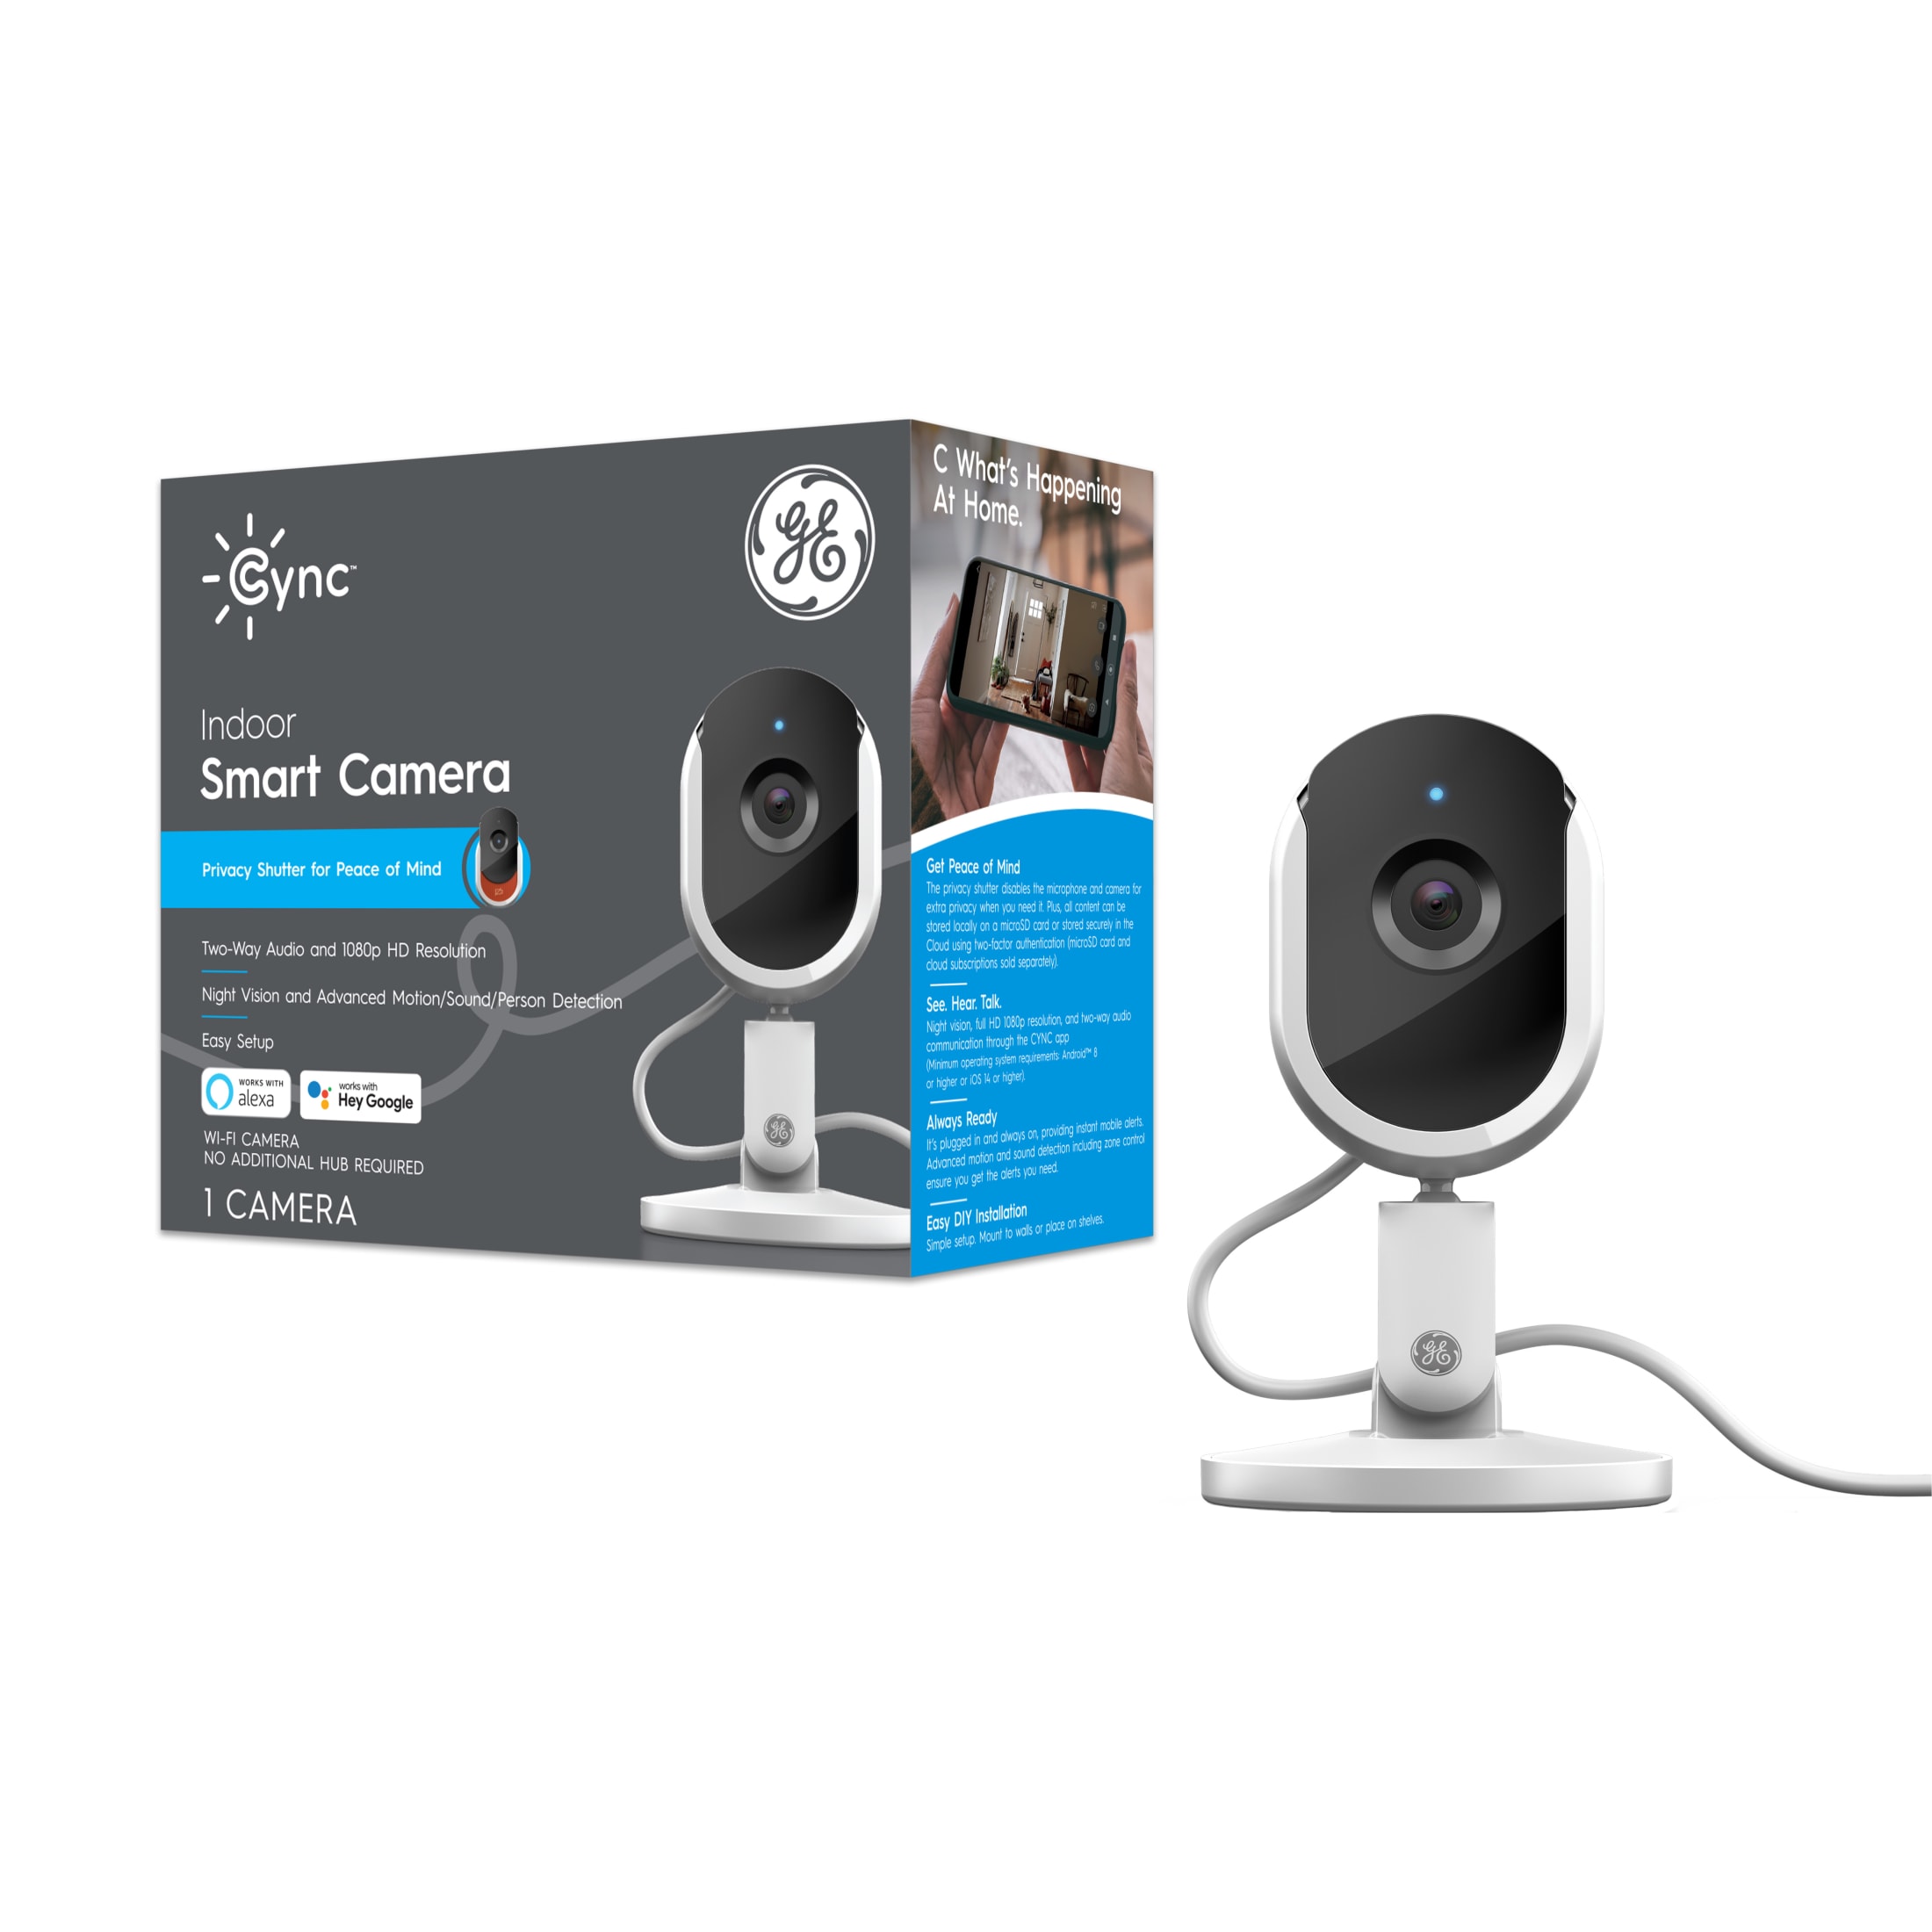 GE Cync Indoor Smart Camera, WiFi Security Camera, Works with Alexa and Google, White - image 1 of 7